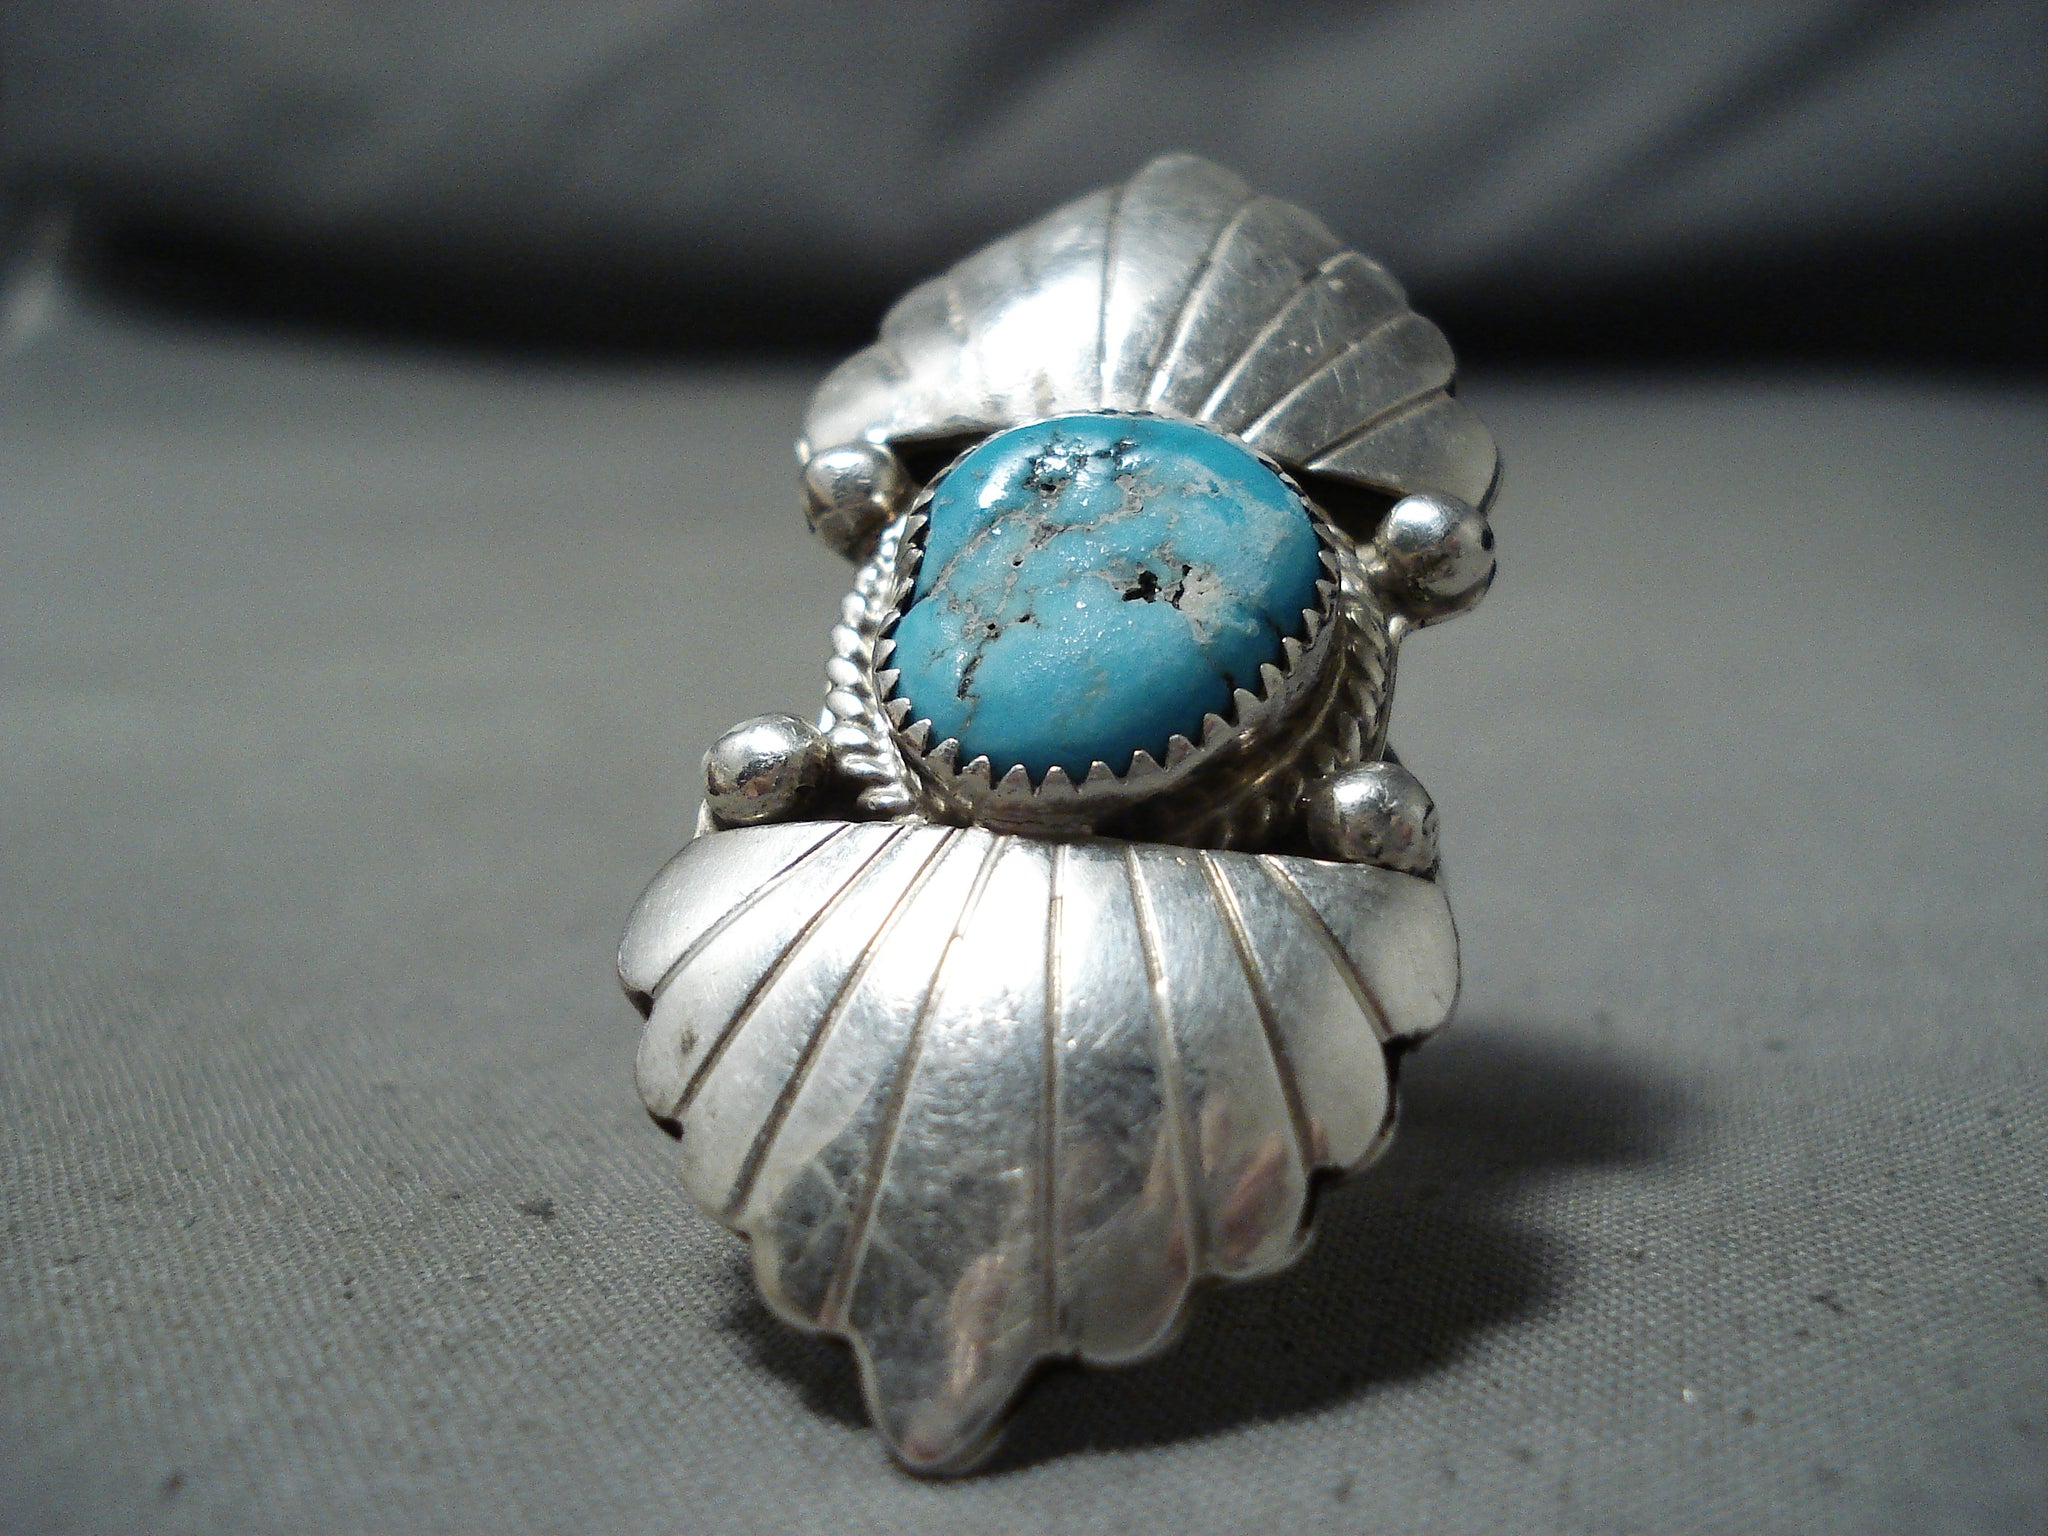 Crochet Ring Fine Silver Ring With Turquoise Beads 